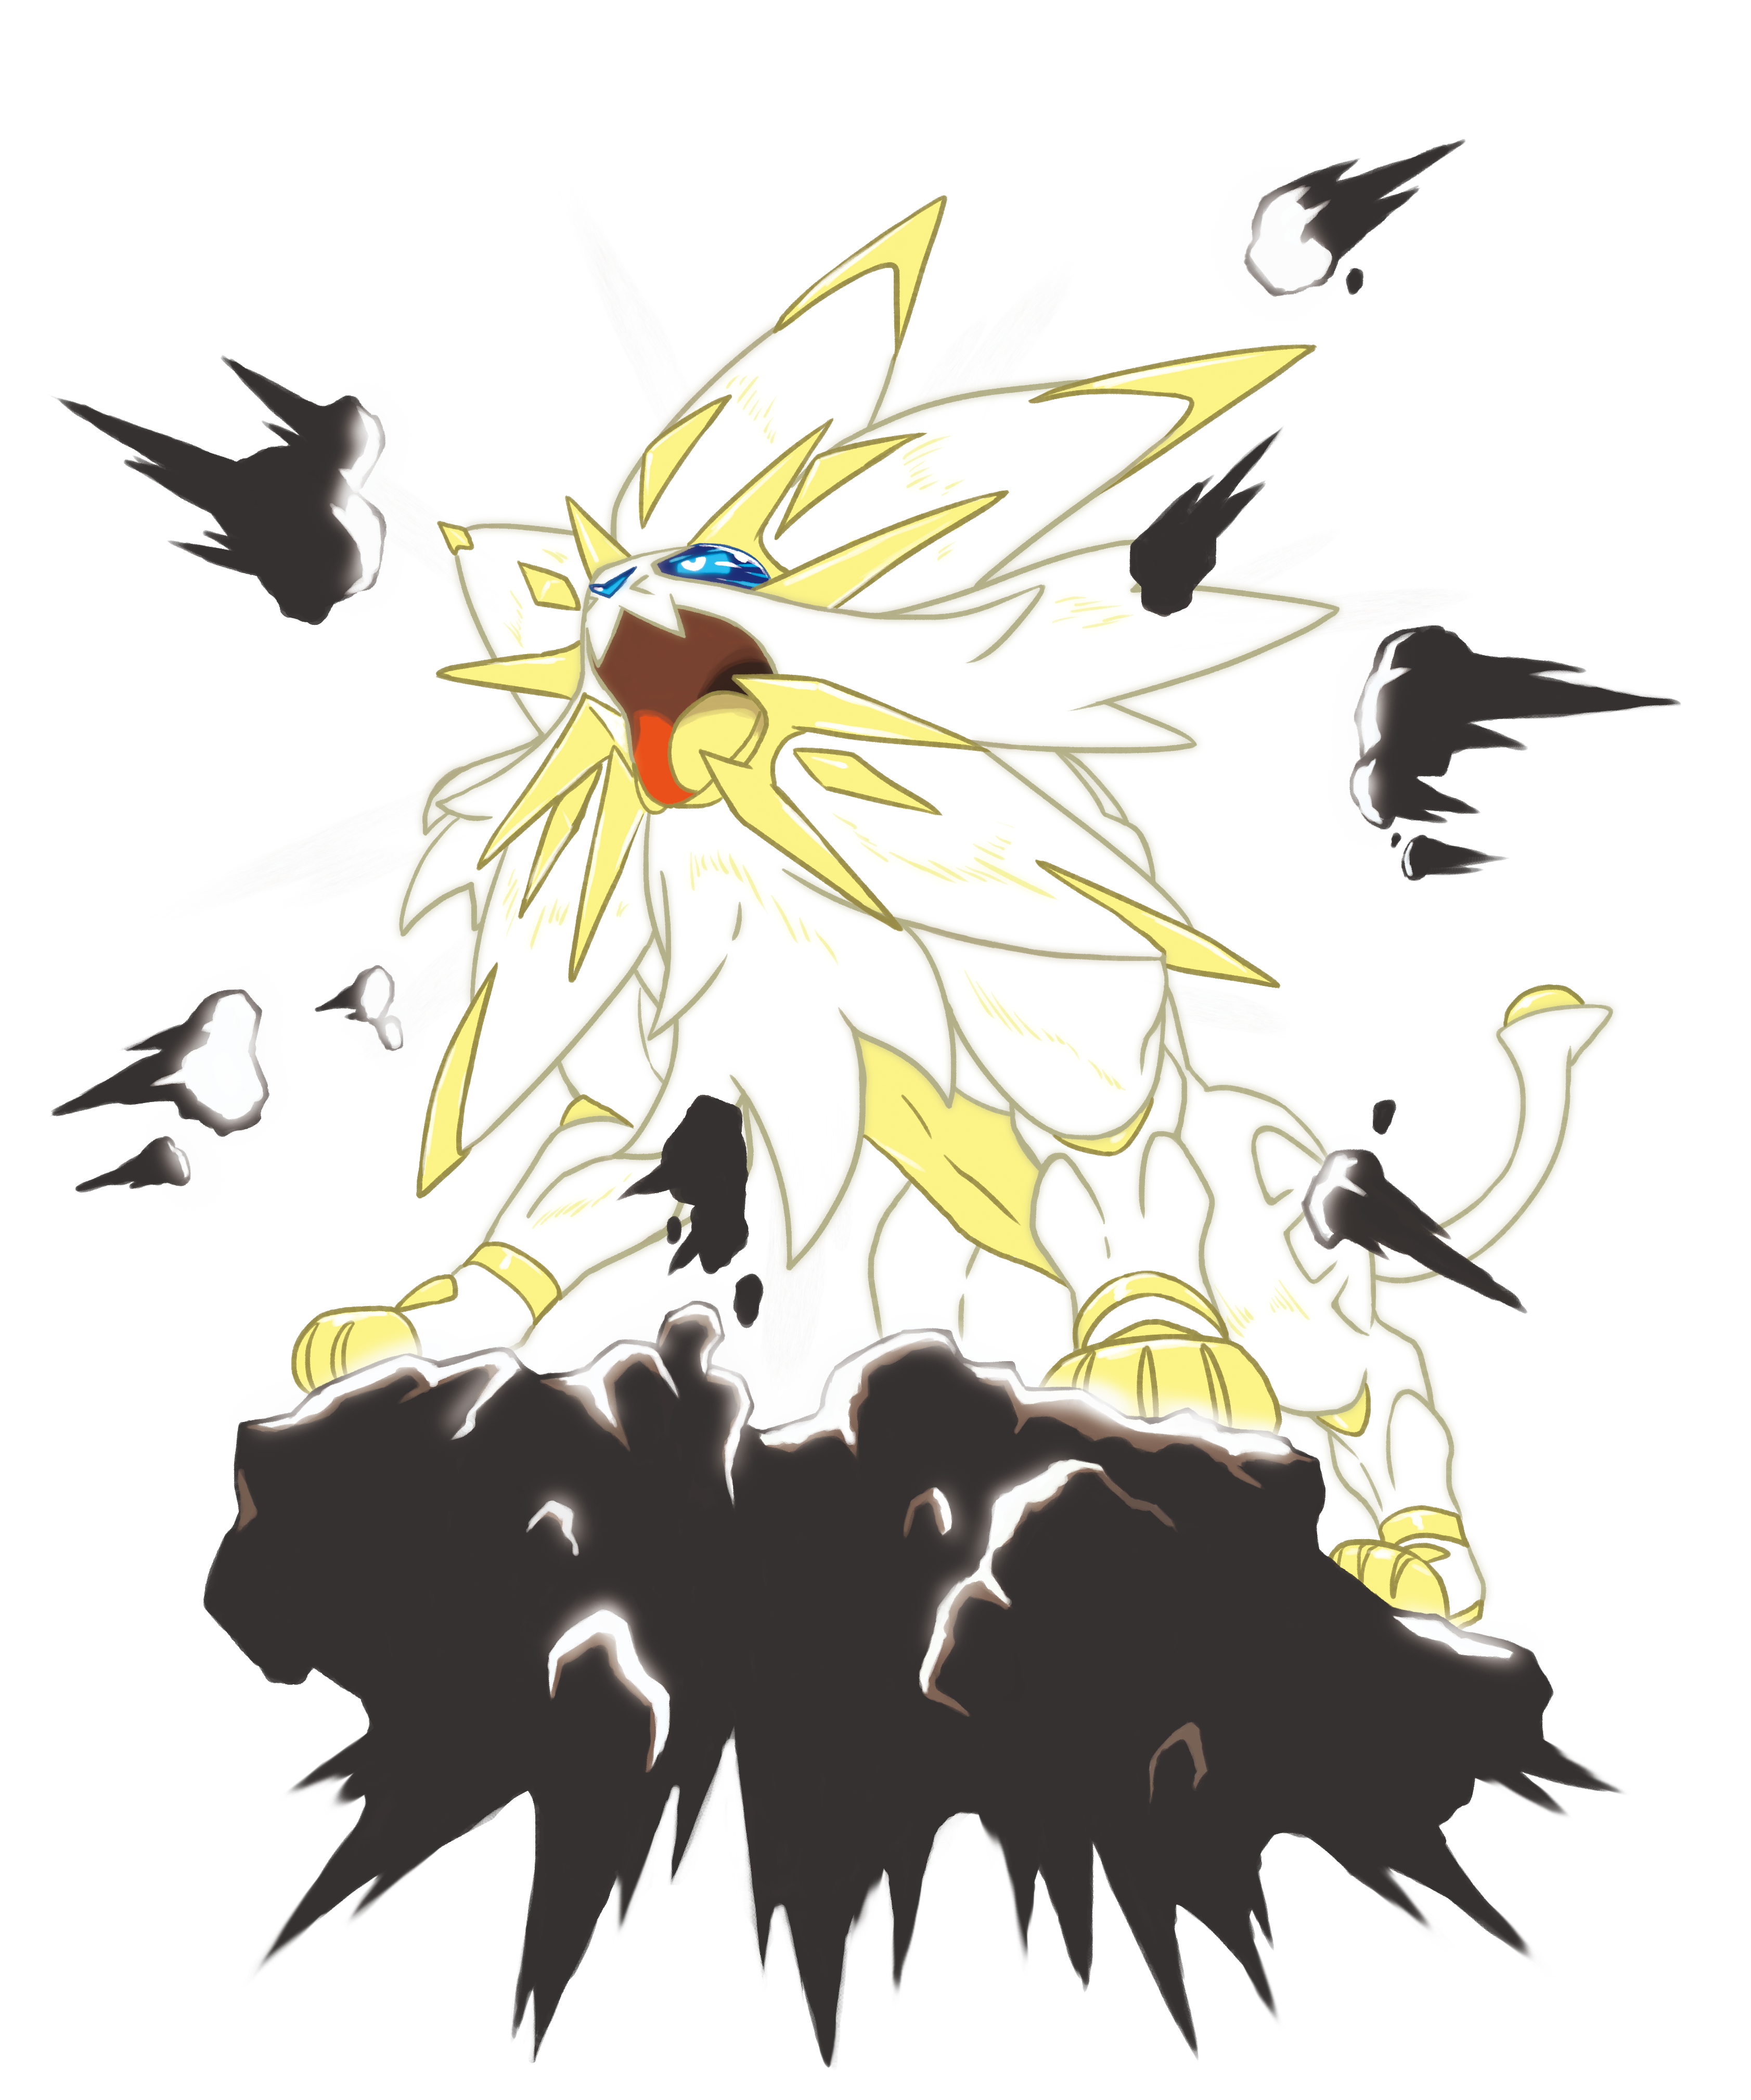 Pokémon - Solgaleo and Lunala hold a vital key to your adventures in  Pokémon Sun and Pokémon Moon. Which are you hoping to encounter on your  journey?